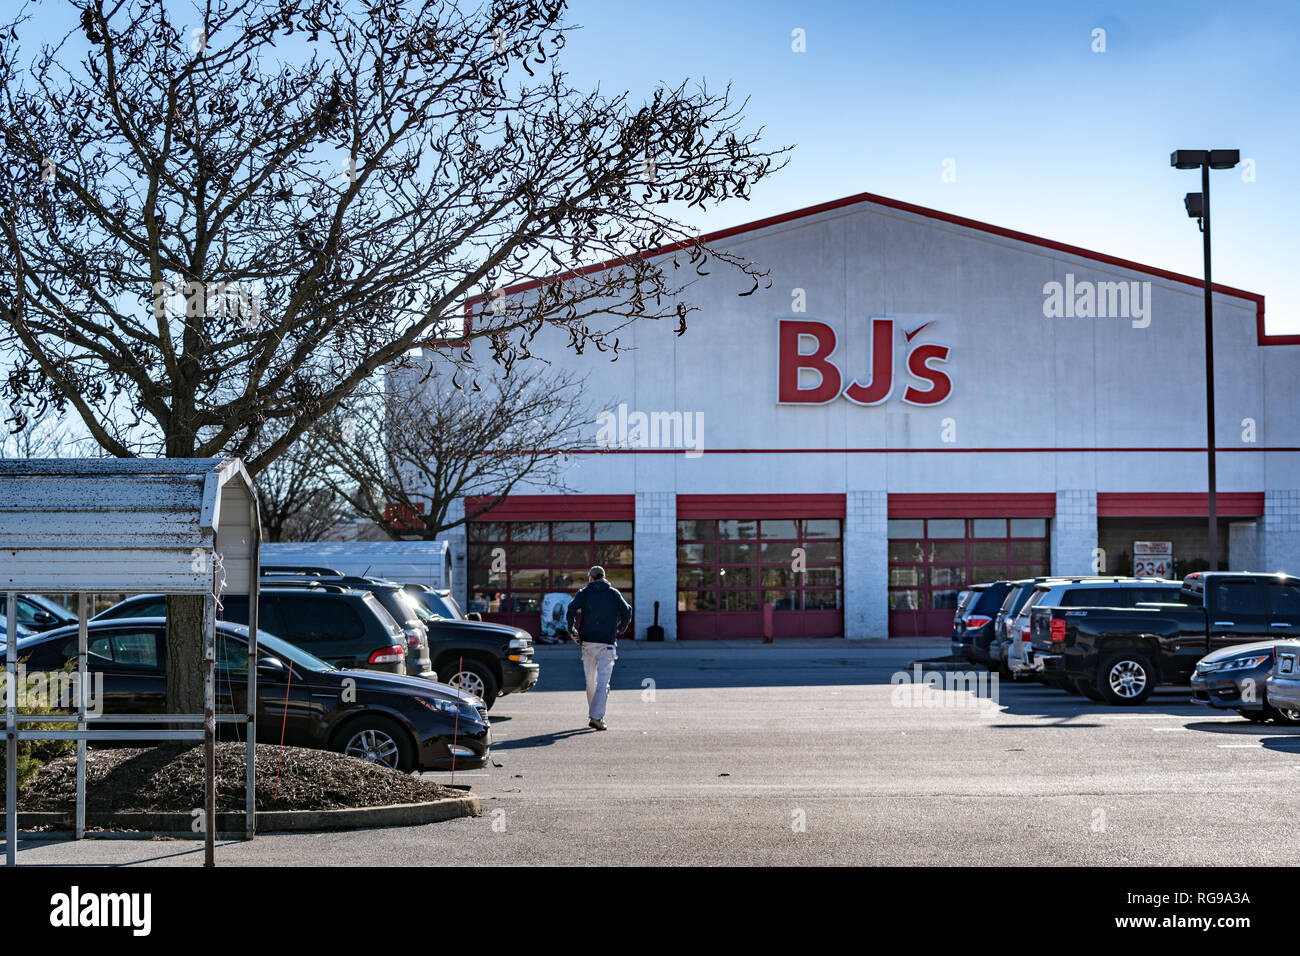 York, PA, USA - December 18, 2018: The BJs Wholesale Club is a membership-only warehouse chain operating in the Eastern United States. The chain has o Stock Photo